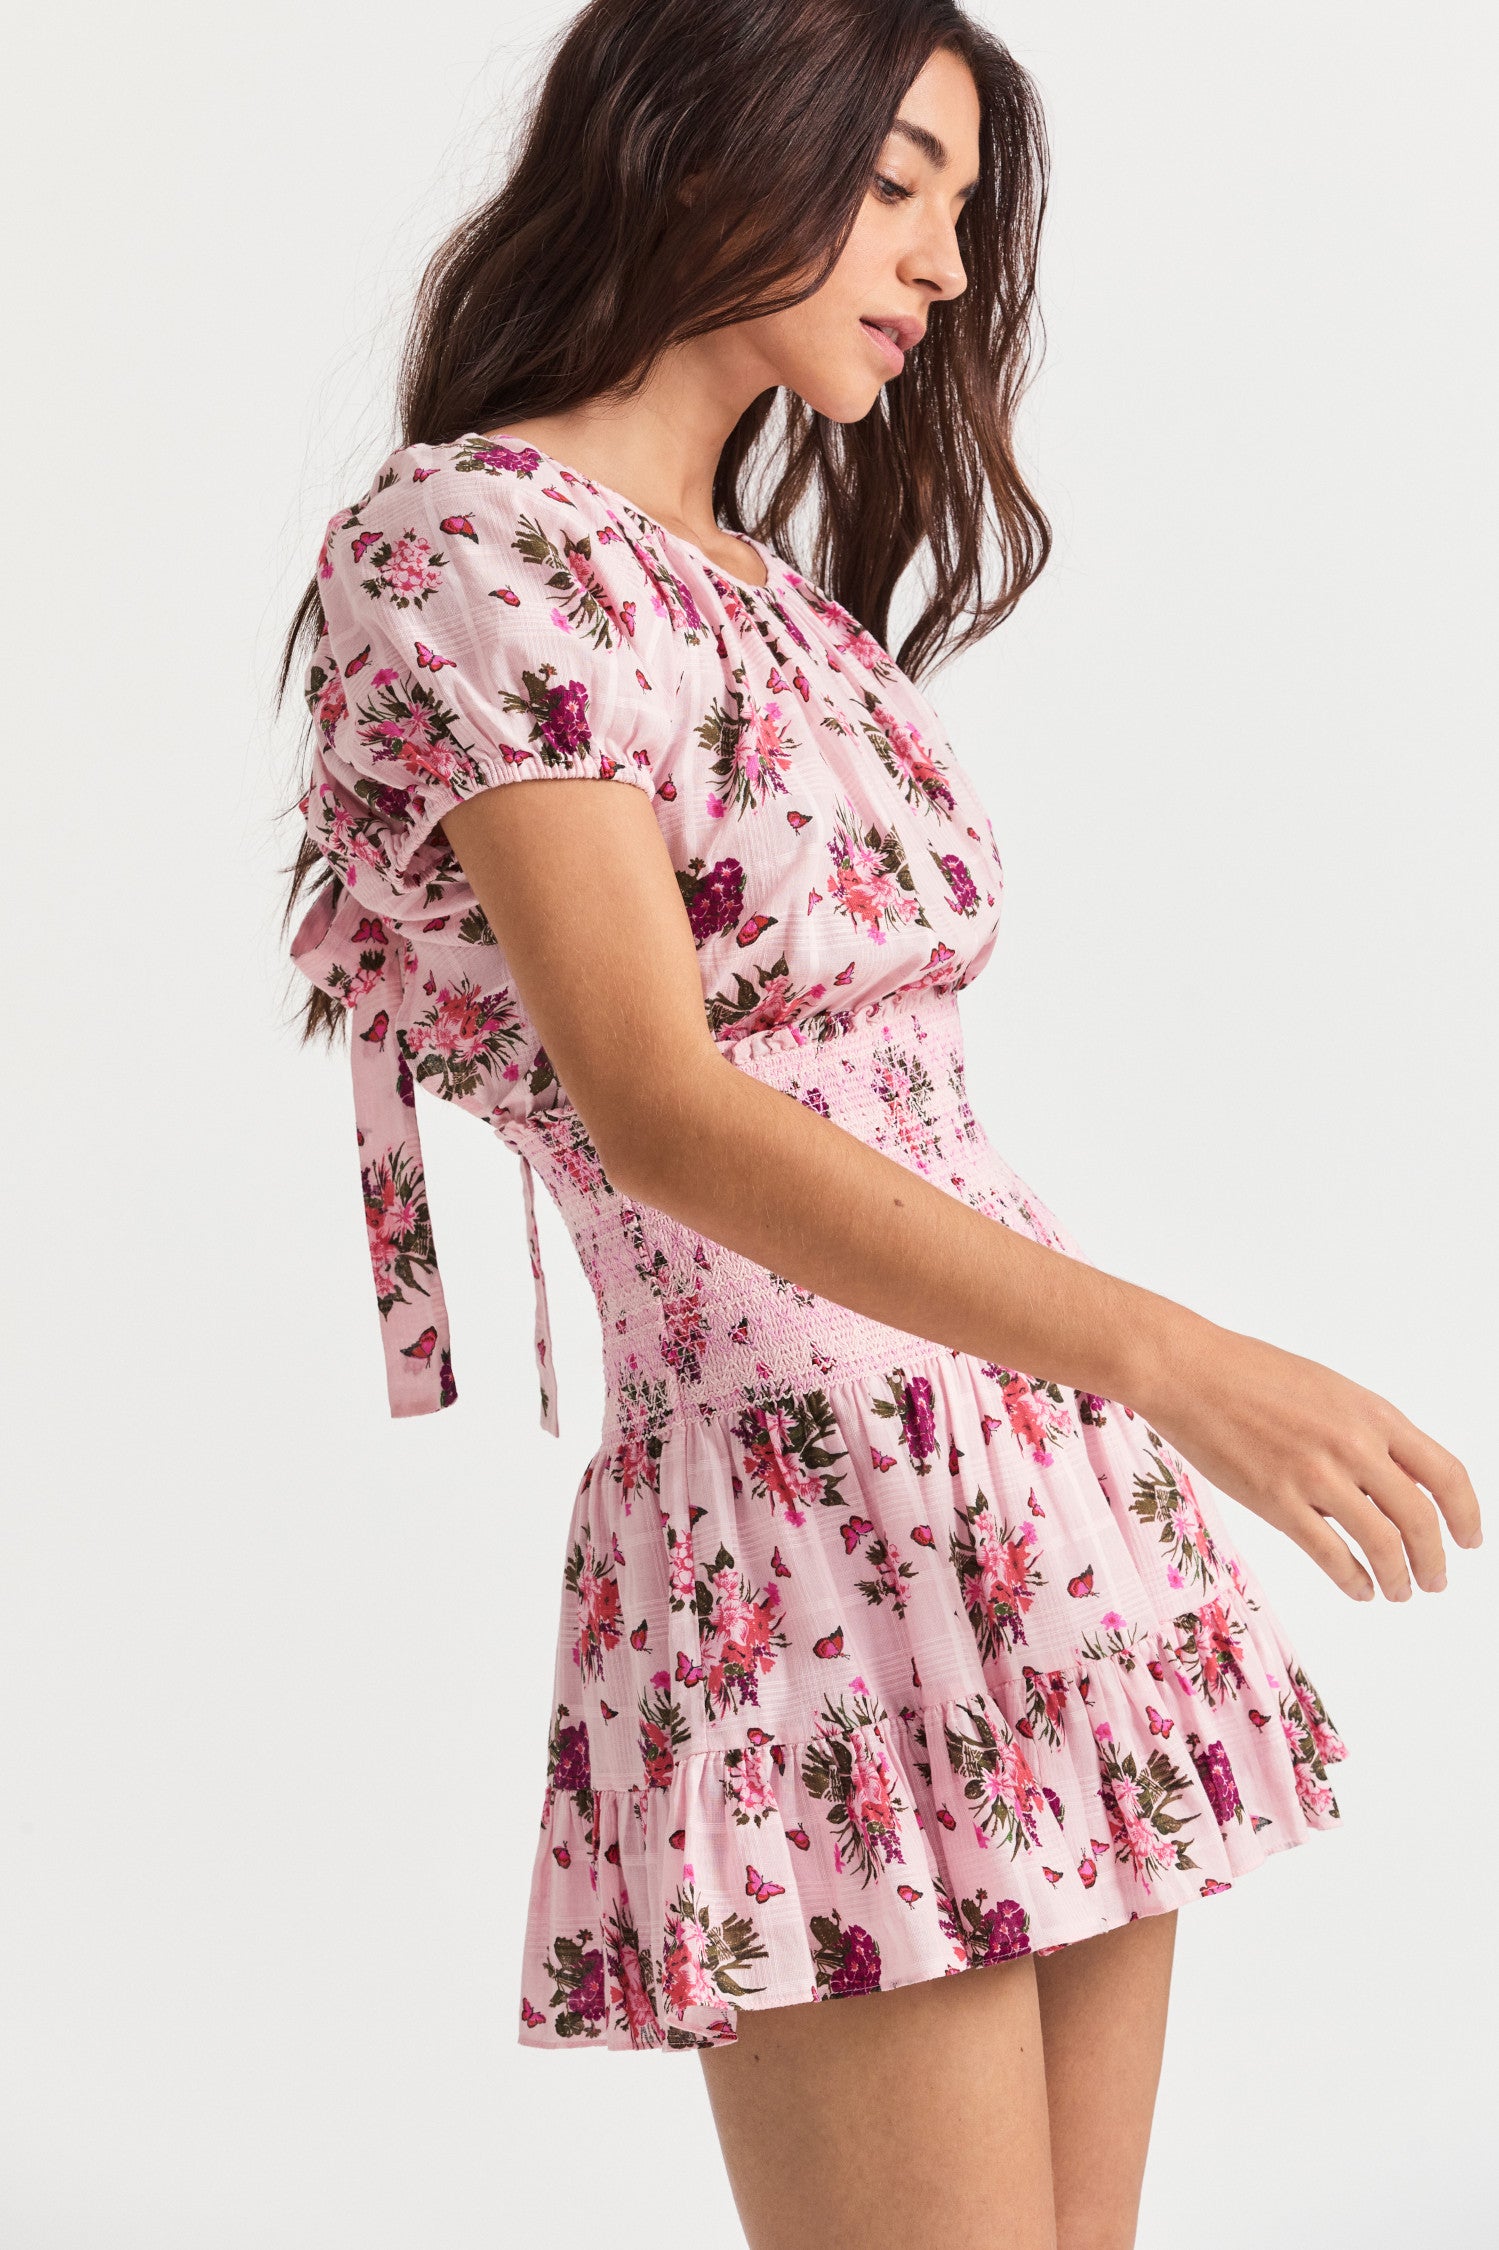 Pink floral mini dress with smocking detail, an elasticated neck opening, short puff sleeves, a flowy skirt, and a bow revealing a slightly open back. 